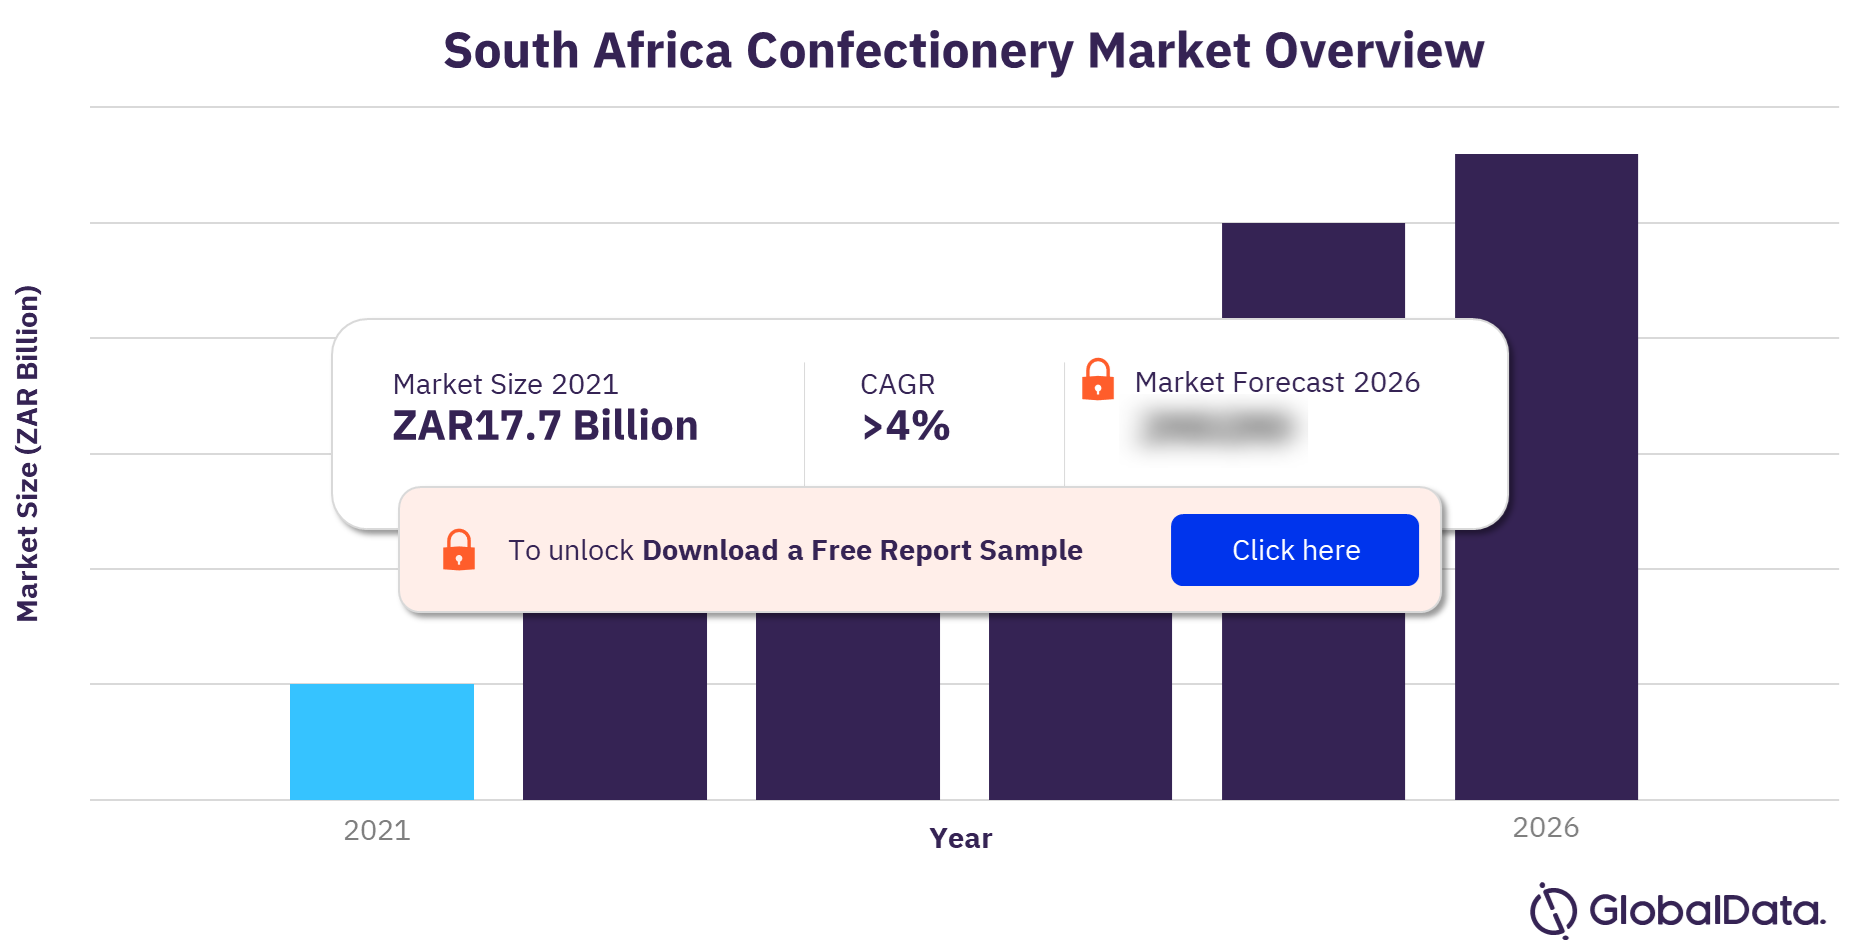 South Africa Confectionery Market Size 